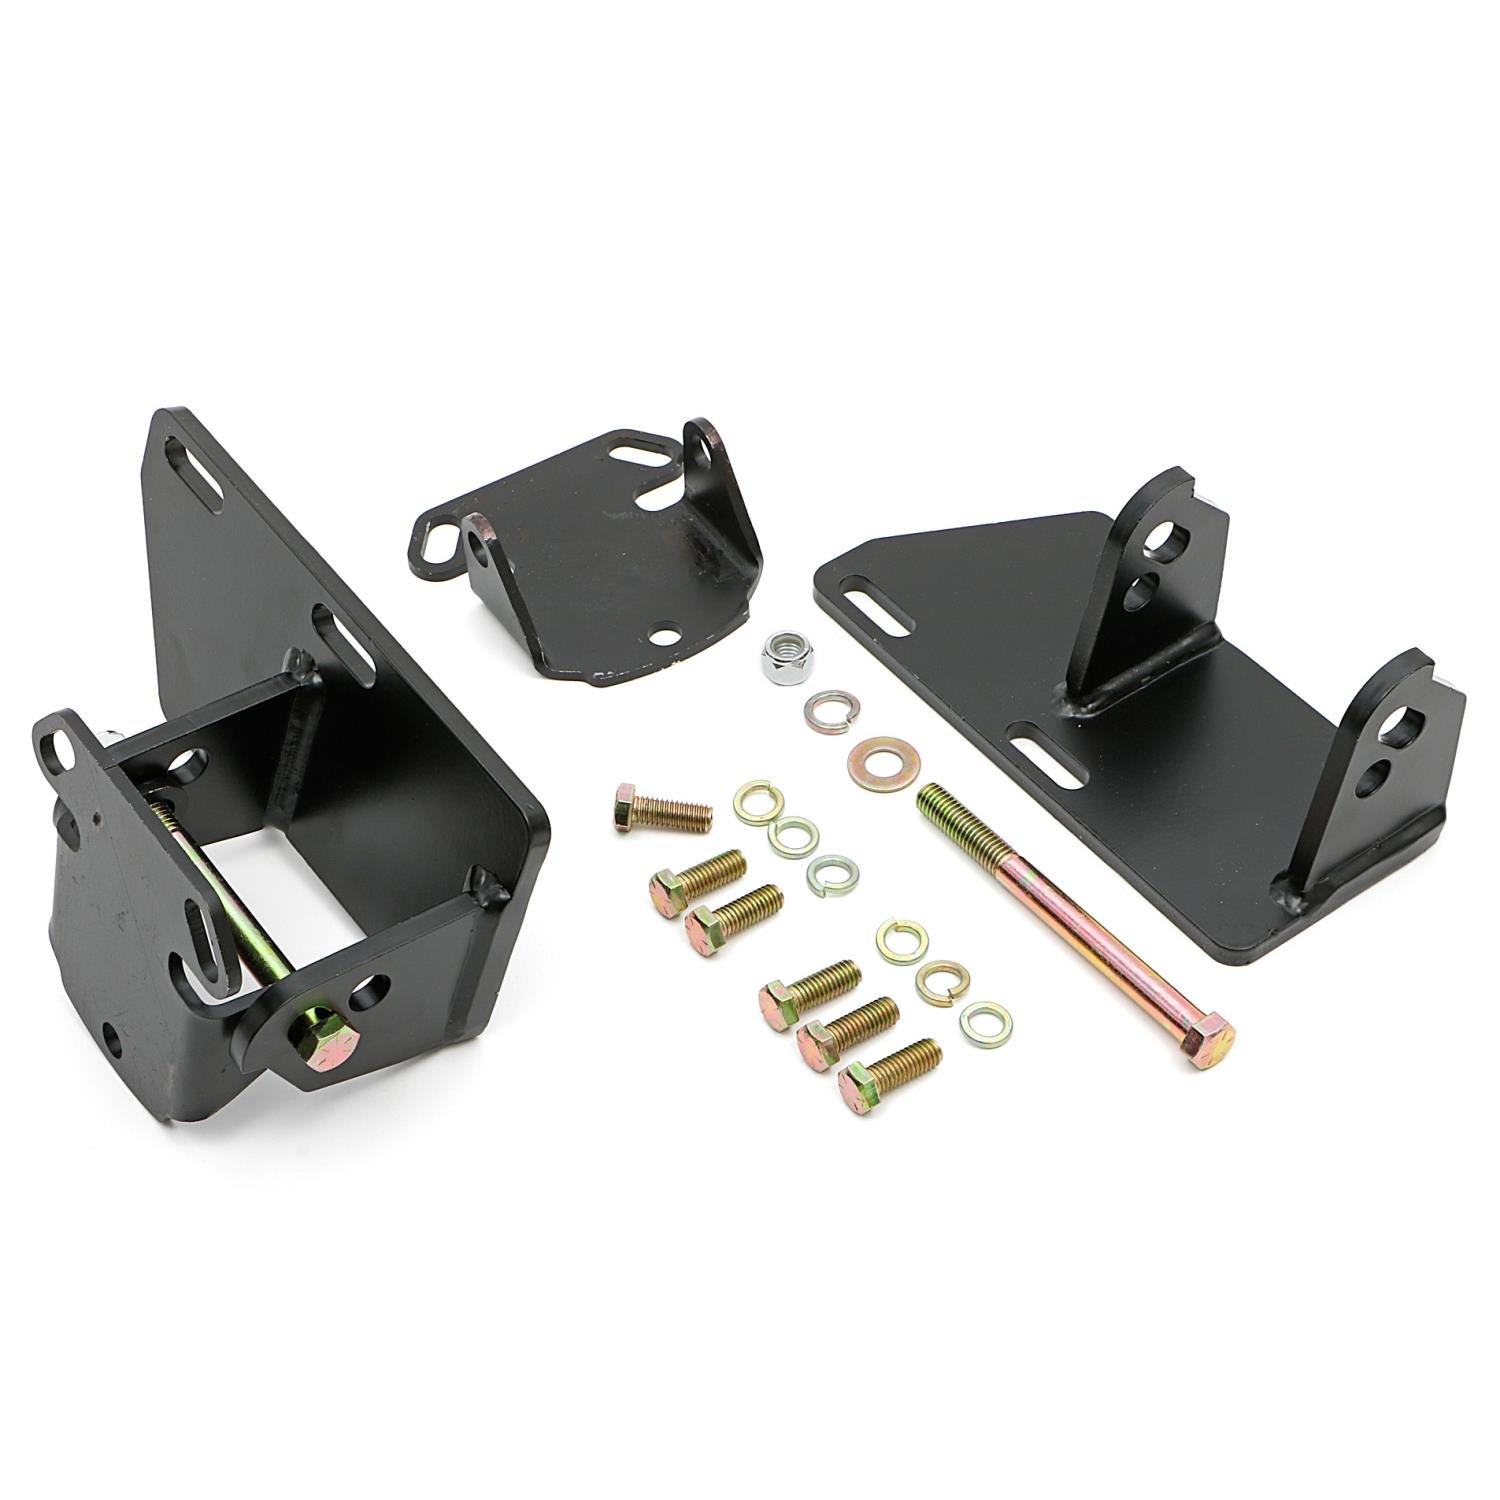 Engine Swap Motor Mount Kit Small Block Chevy V8 into S10/S15 2WD